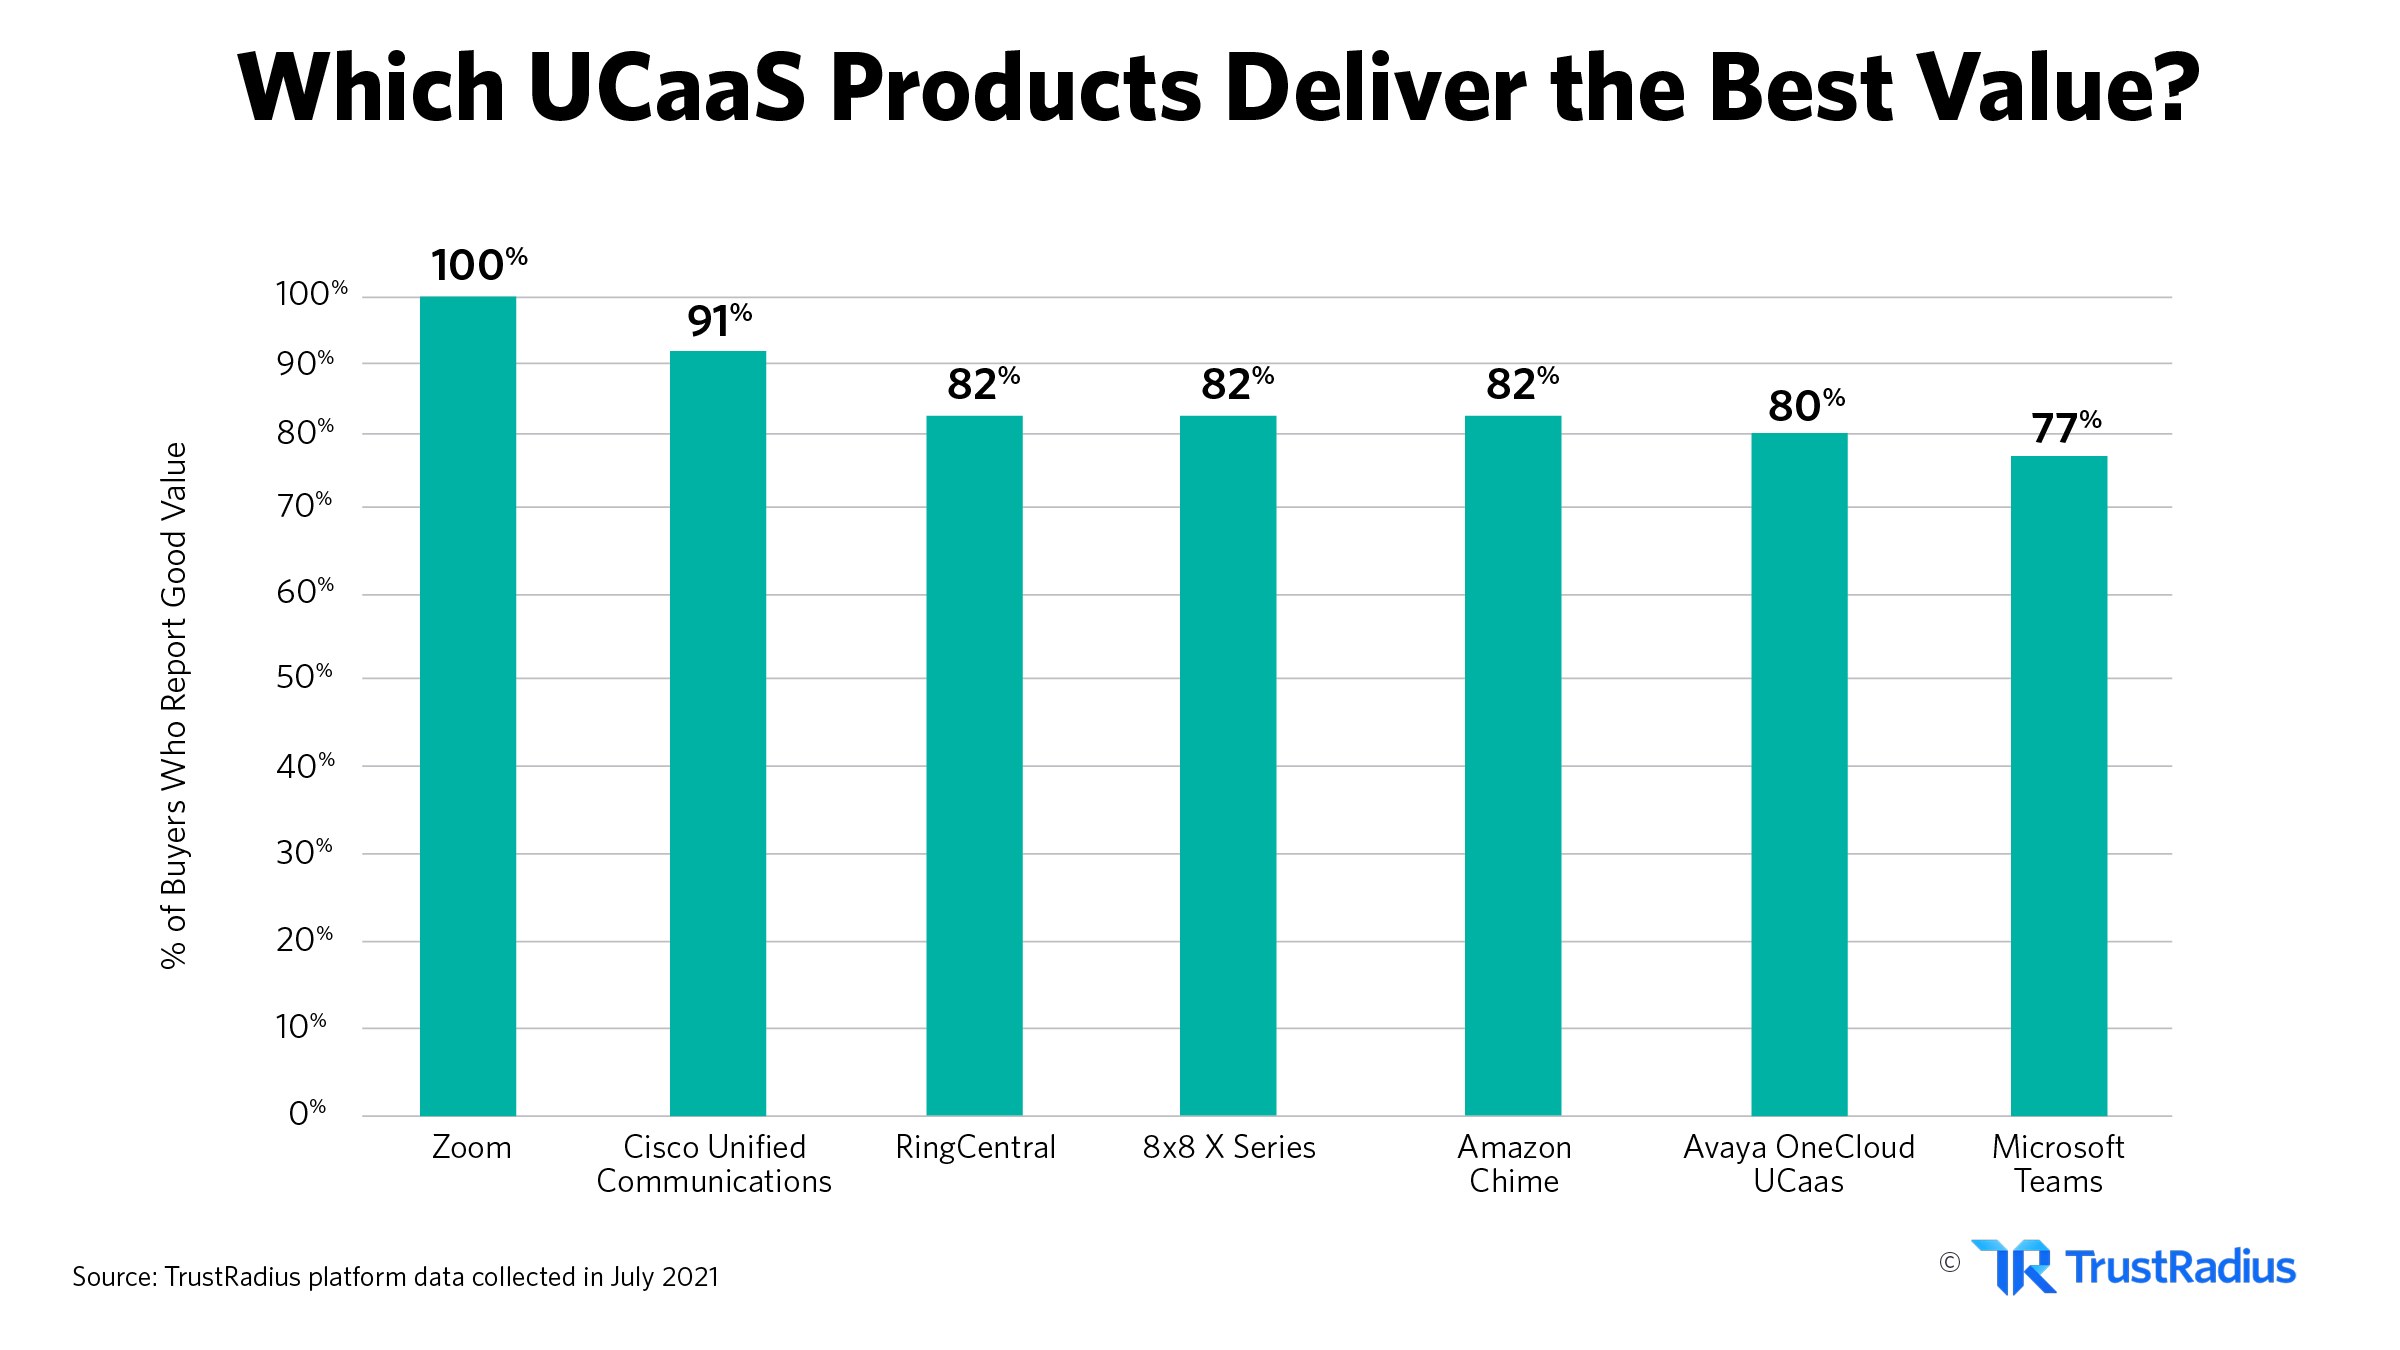 Which UCaaS products deliver the best value